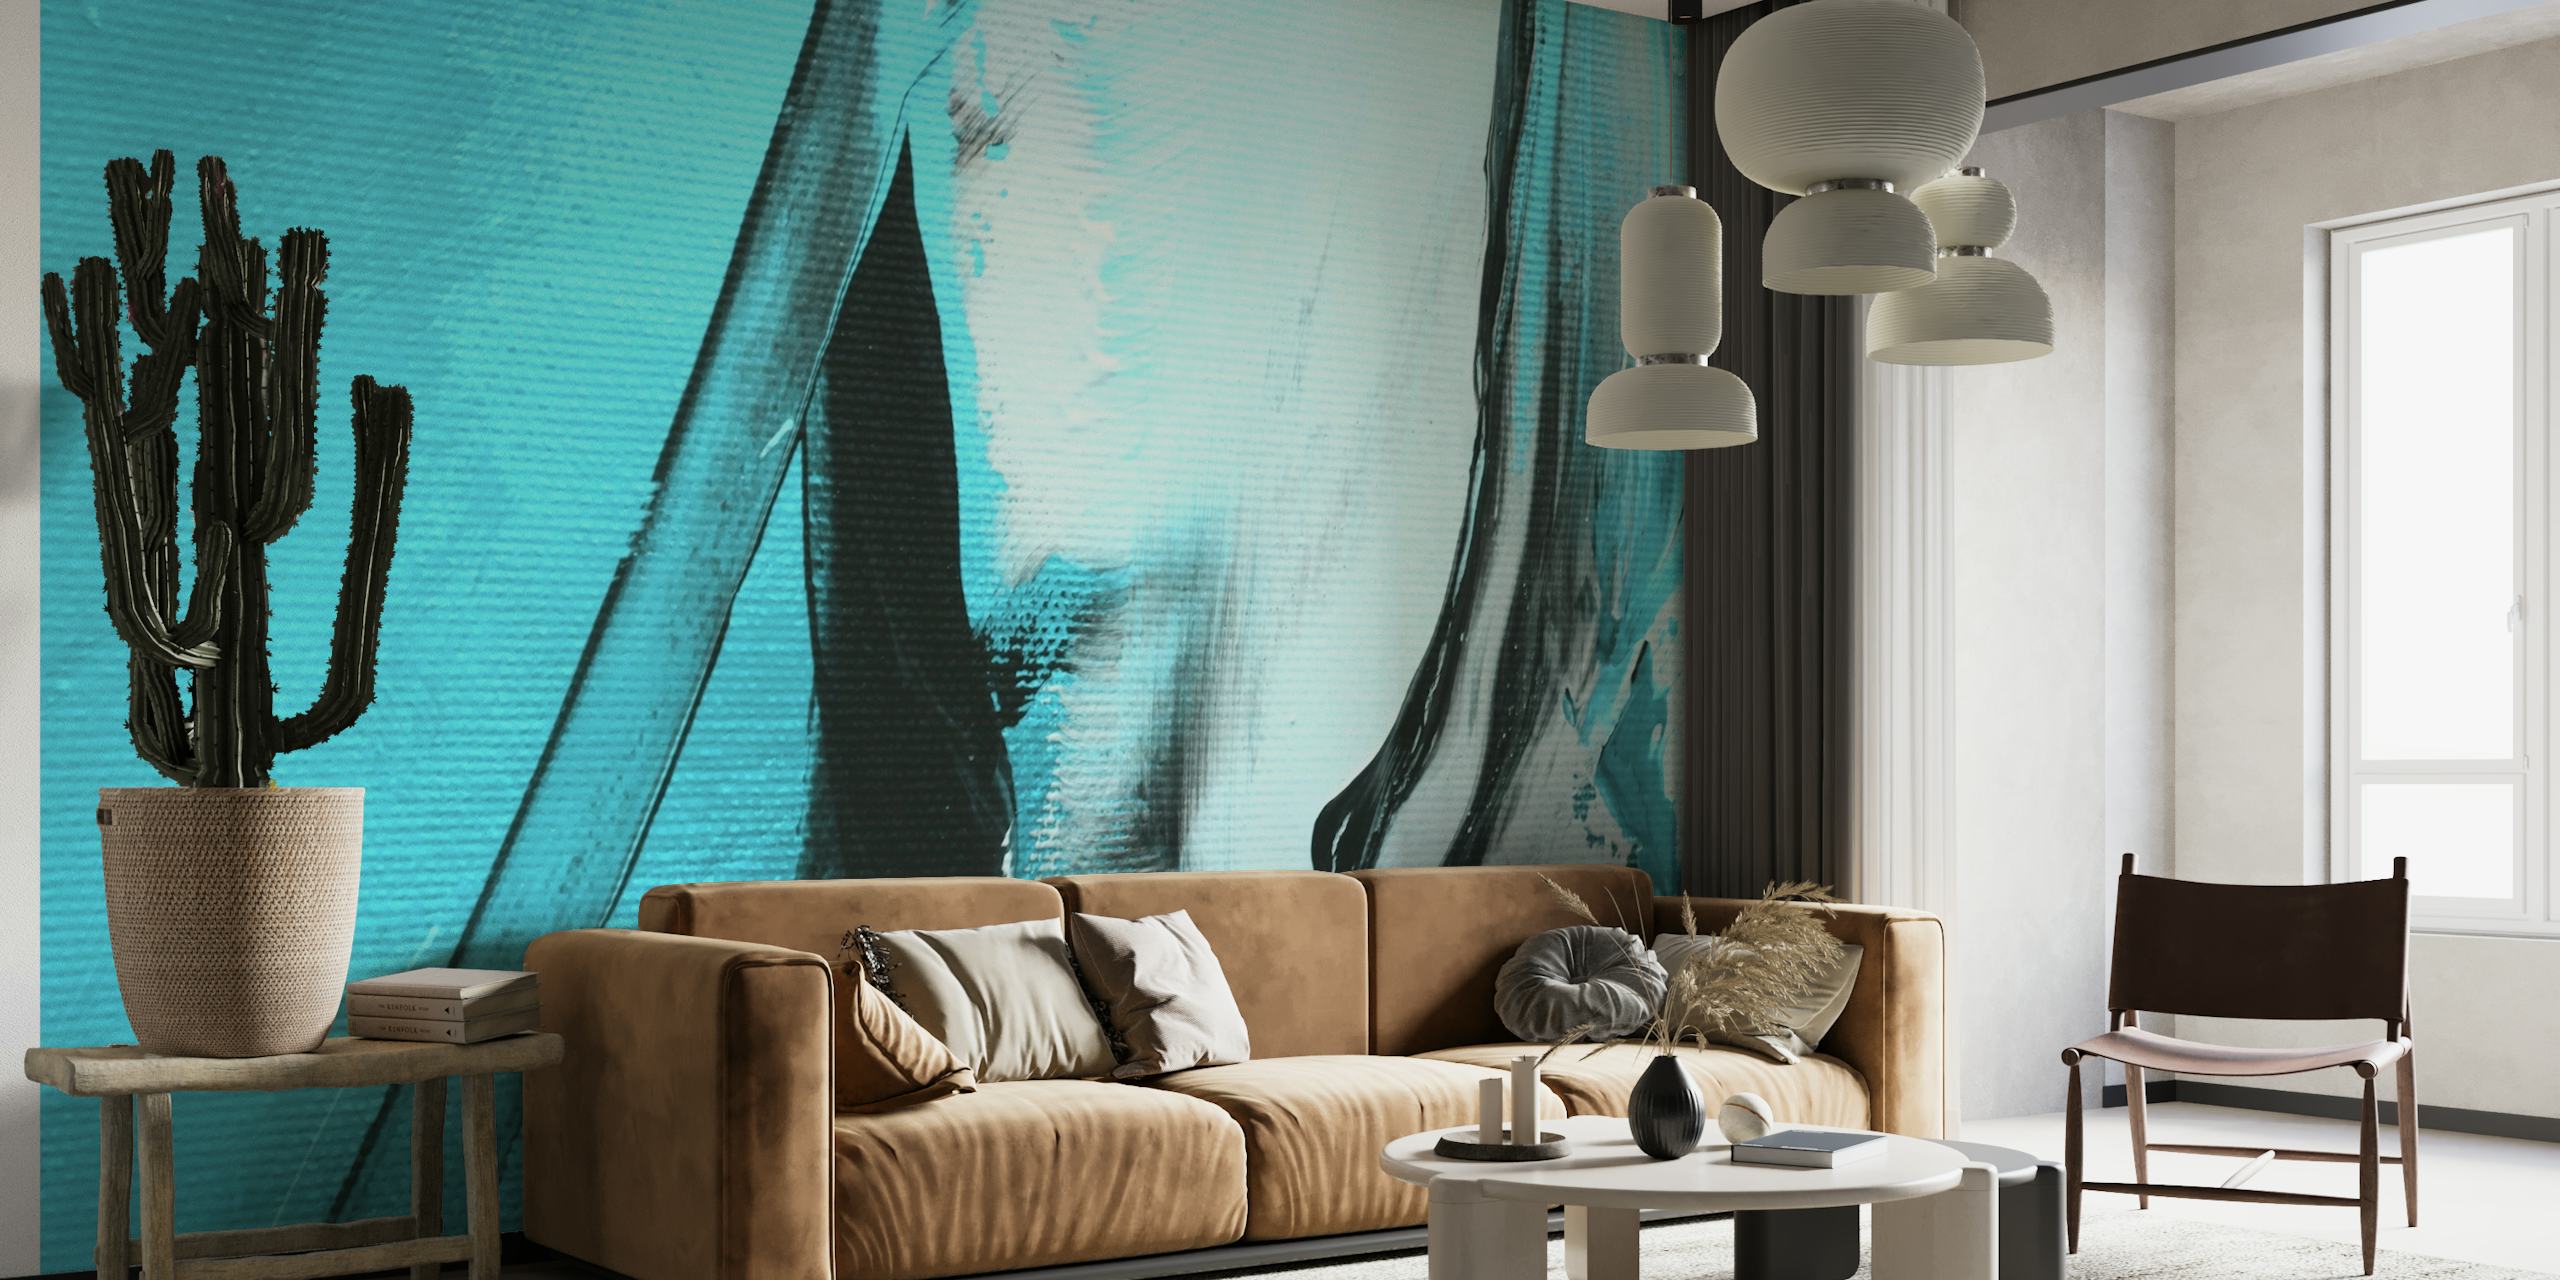 Turquoise Meets Black Abstract Art behang